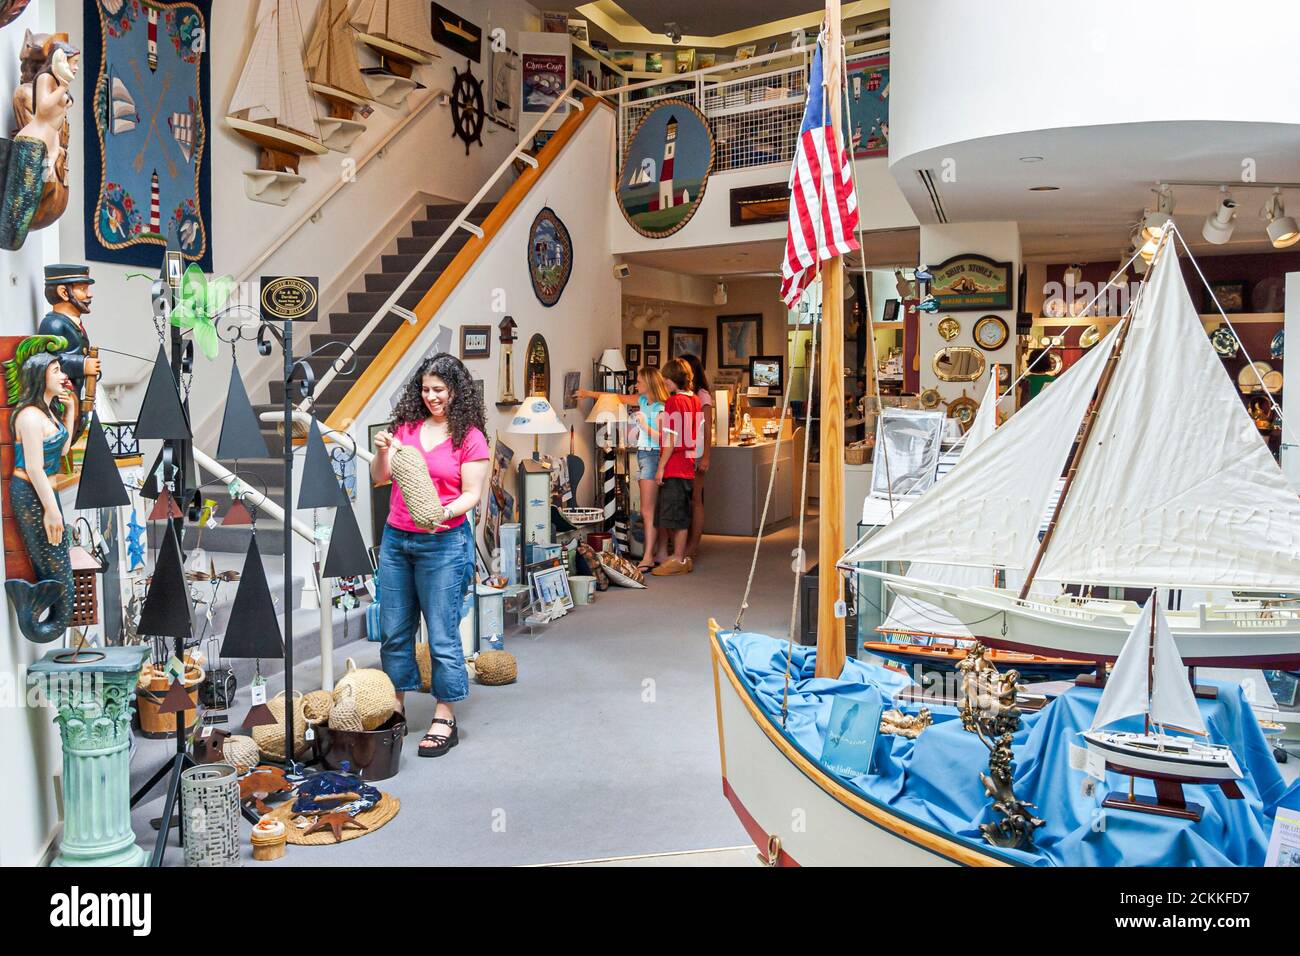 Newport News Virginia,Mariners' Museum and Park,history collection exhibits inside interior displays ship models,artifacts woman visiting tourist Stock Photo